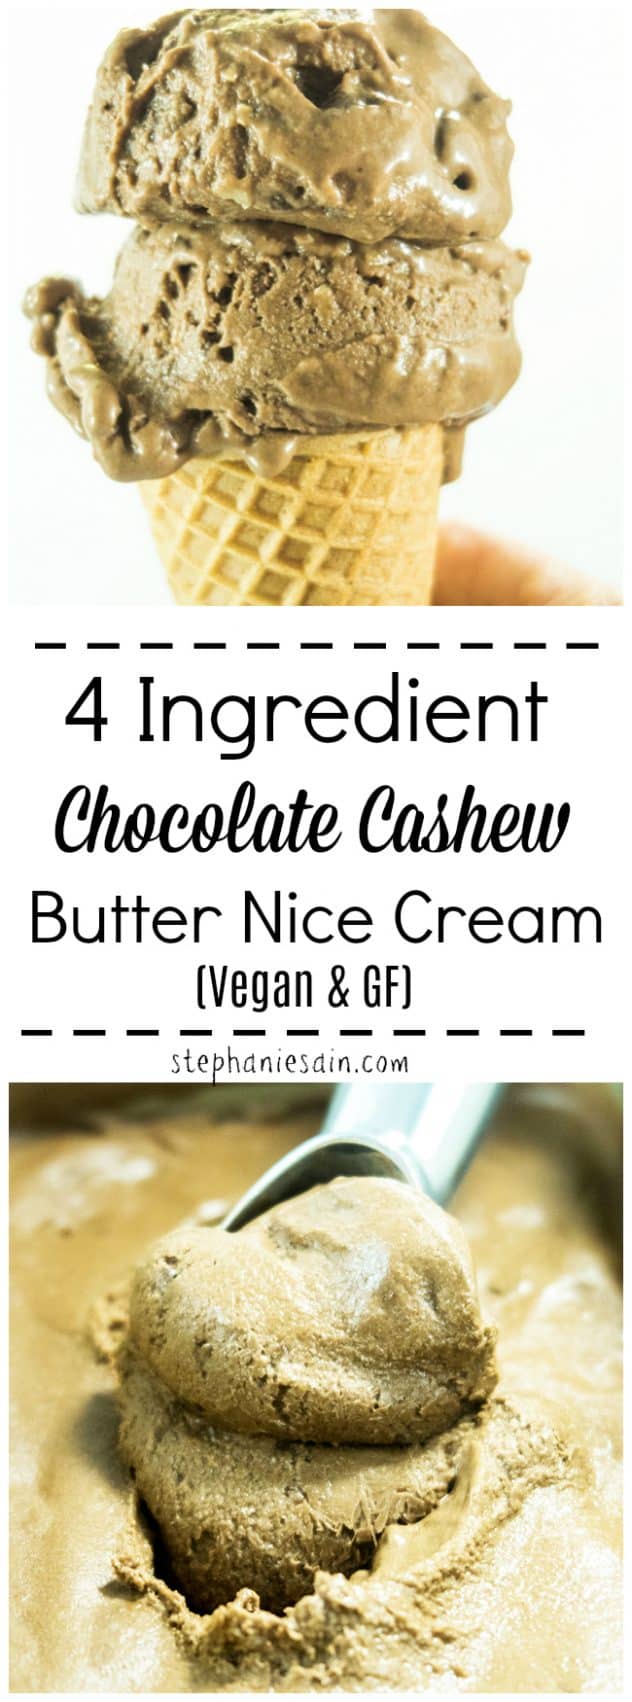 This Chocolate Cashew Butter Nice Cream requires only 4 ingredients for a thick, creamy chocolatey treat. Healthy and guilt free treat great for hot summer days. Can be customized with favorite toppings. Vegan & Gluten Free.